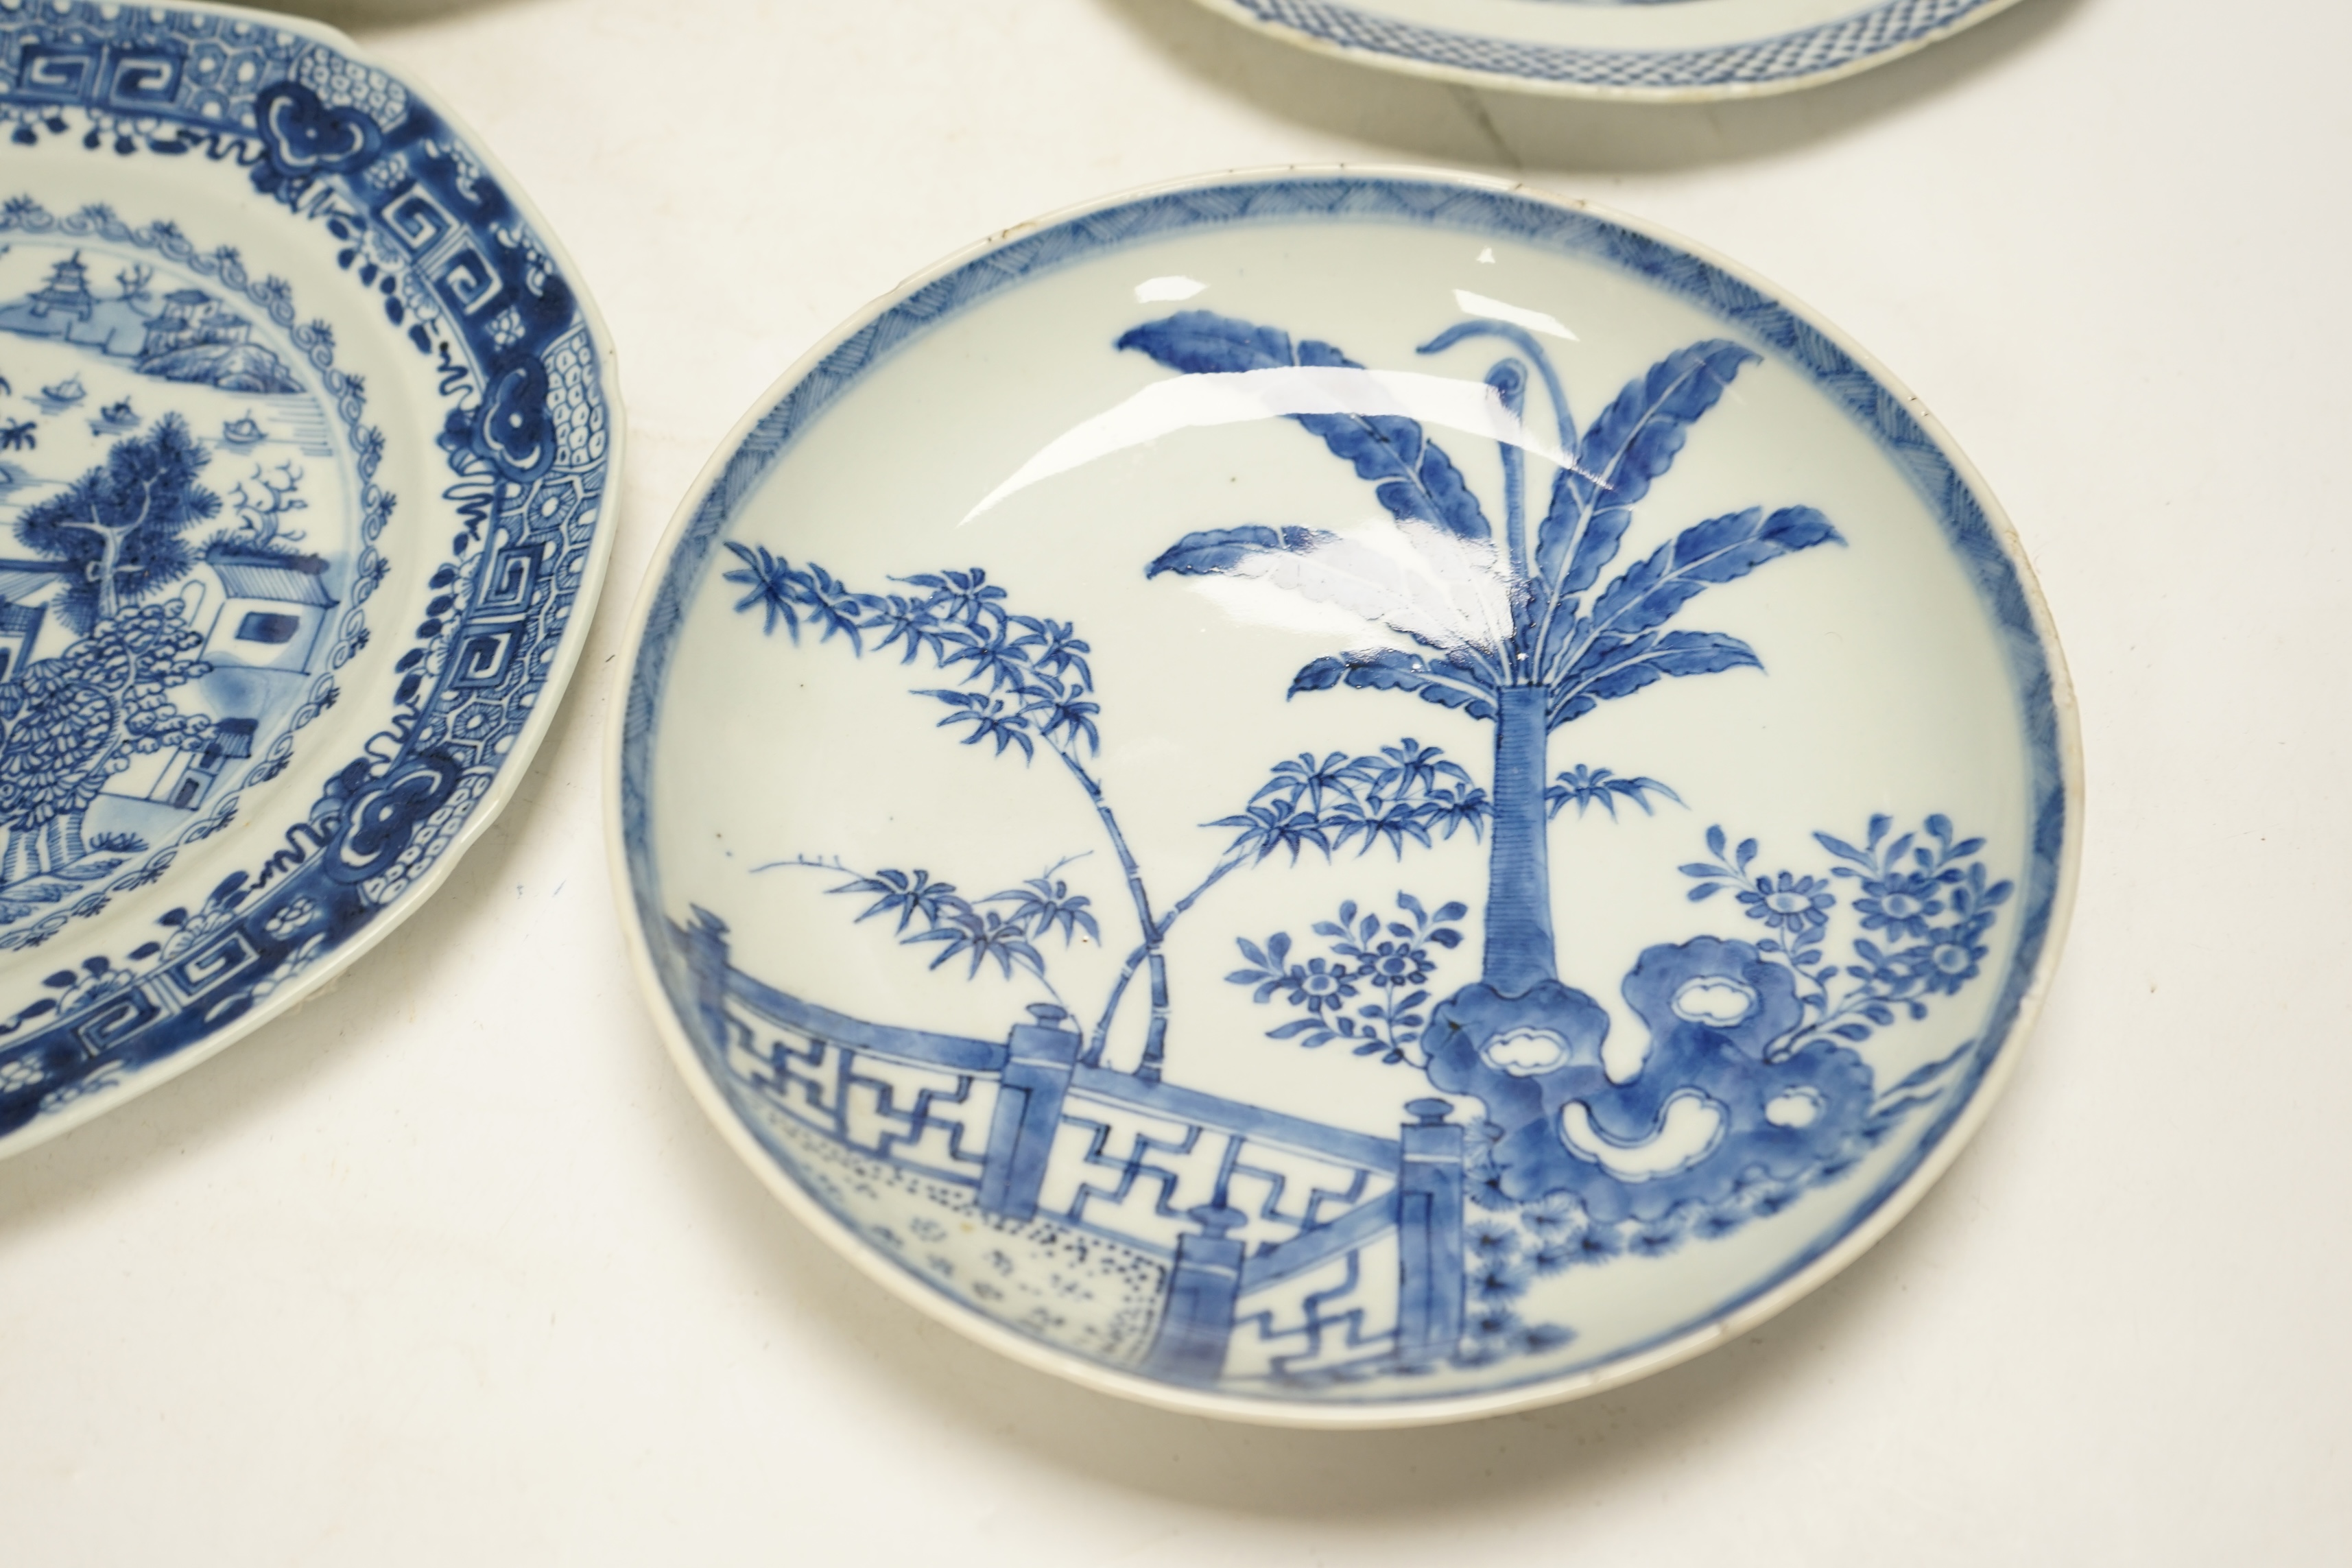 Four various Chinese export blue and white dishes, 18th/19th century, largest 26cm, largest 26cm diameter. Condition - one plate cracked, chips to another